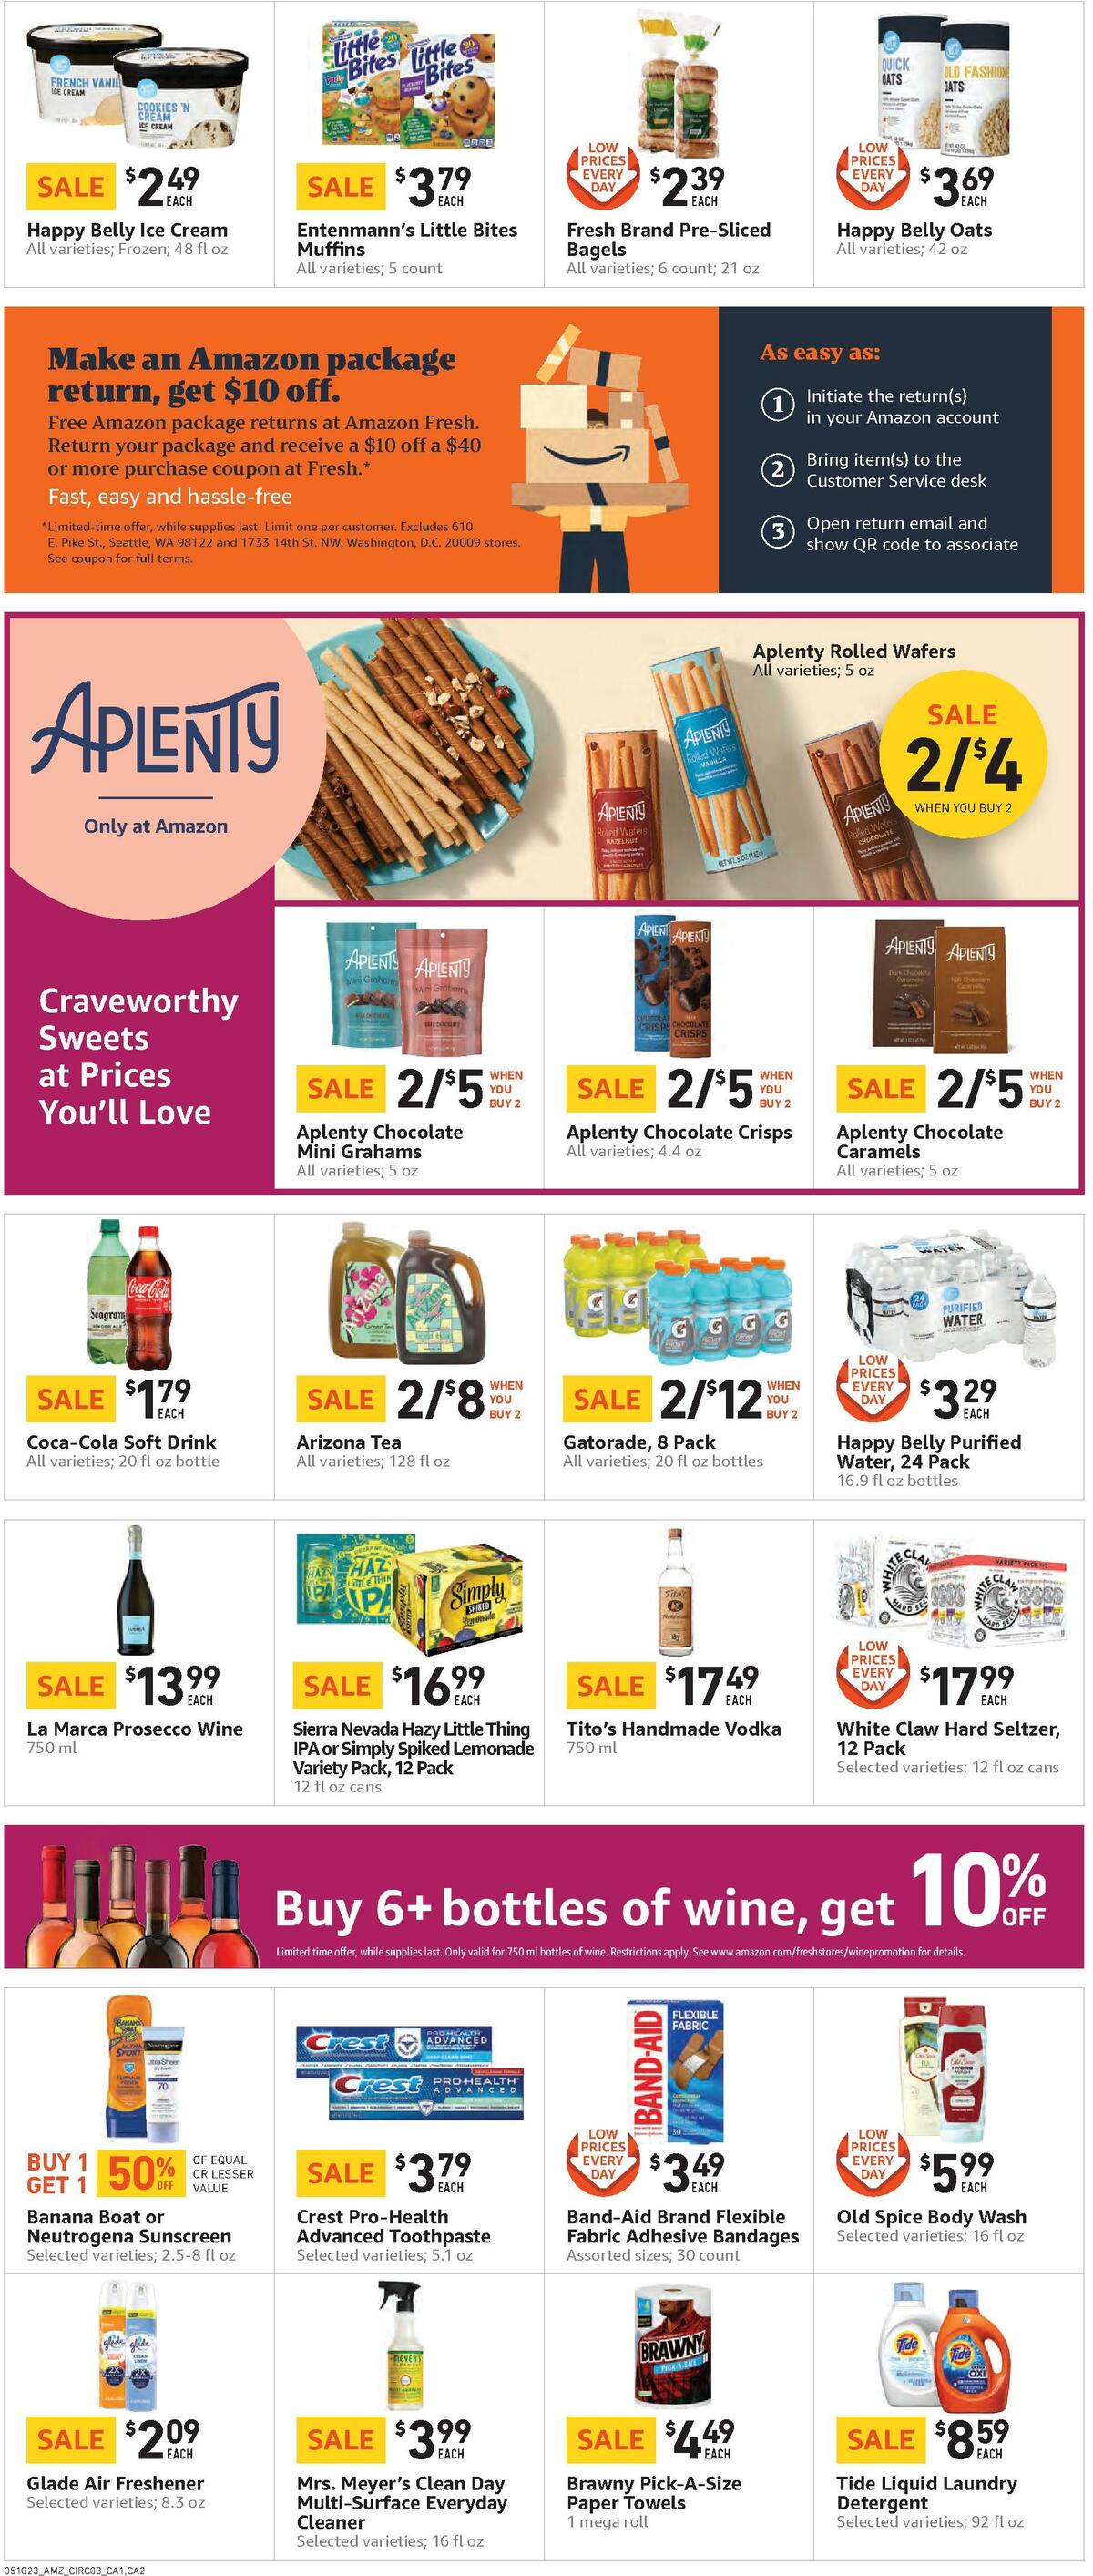 Amazon Fresh Weekly Ad from May 10